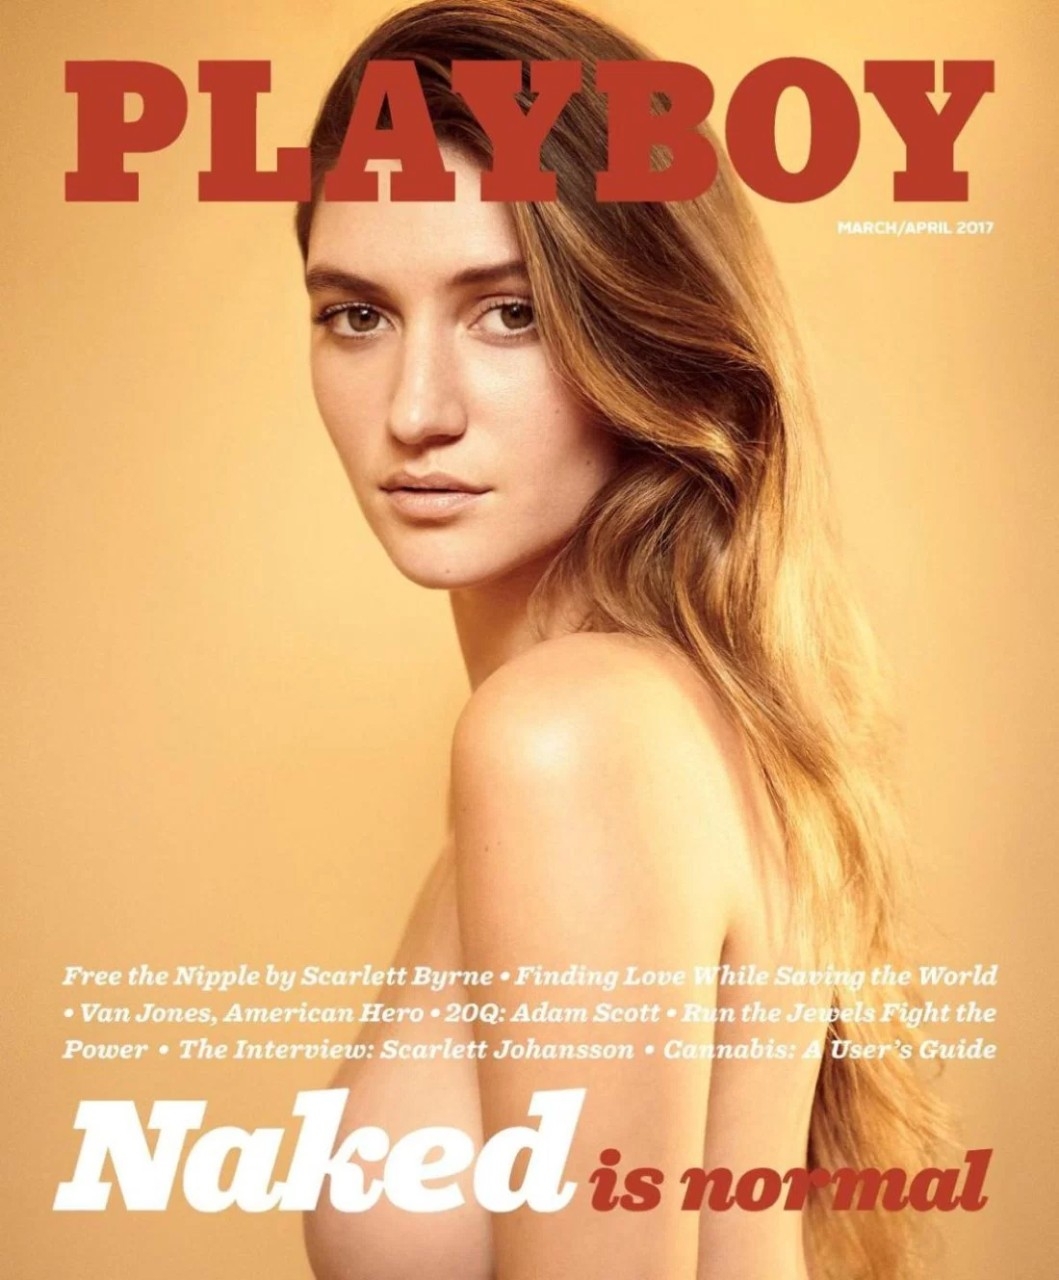 Playboy March/April Issue